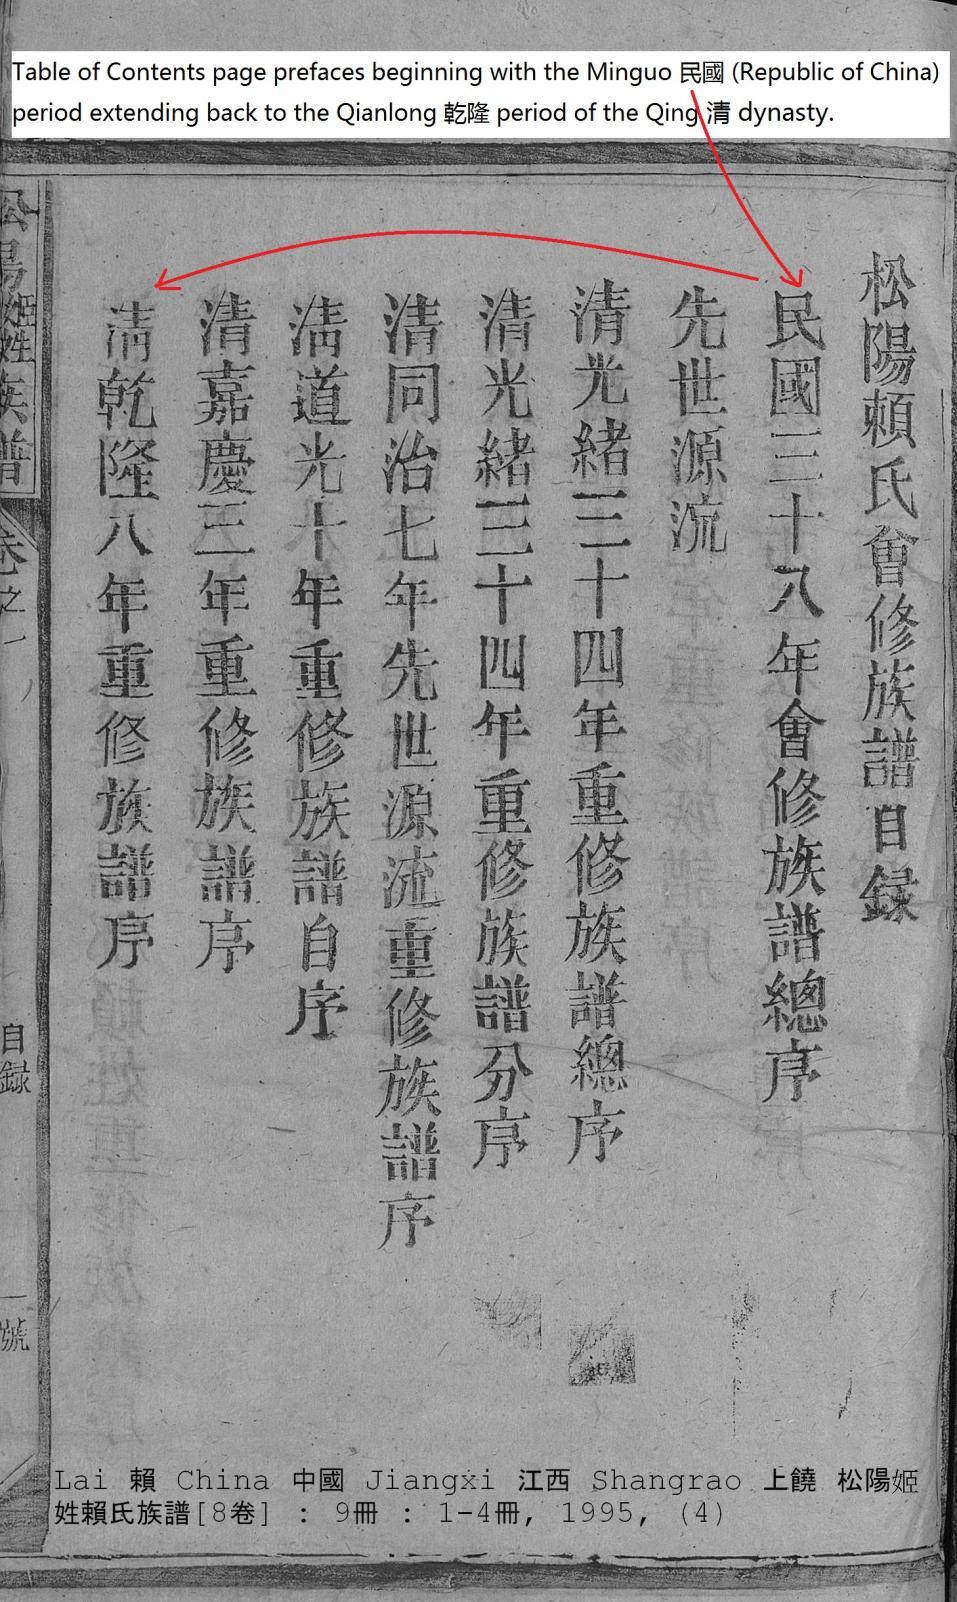 2. Table of contents for Songyang, Lai Family revised clan genealogy.